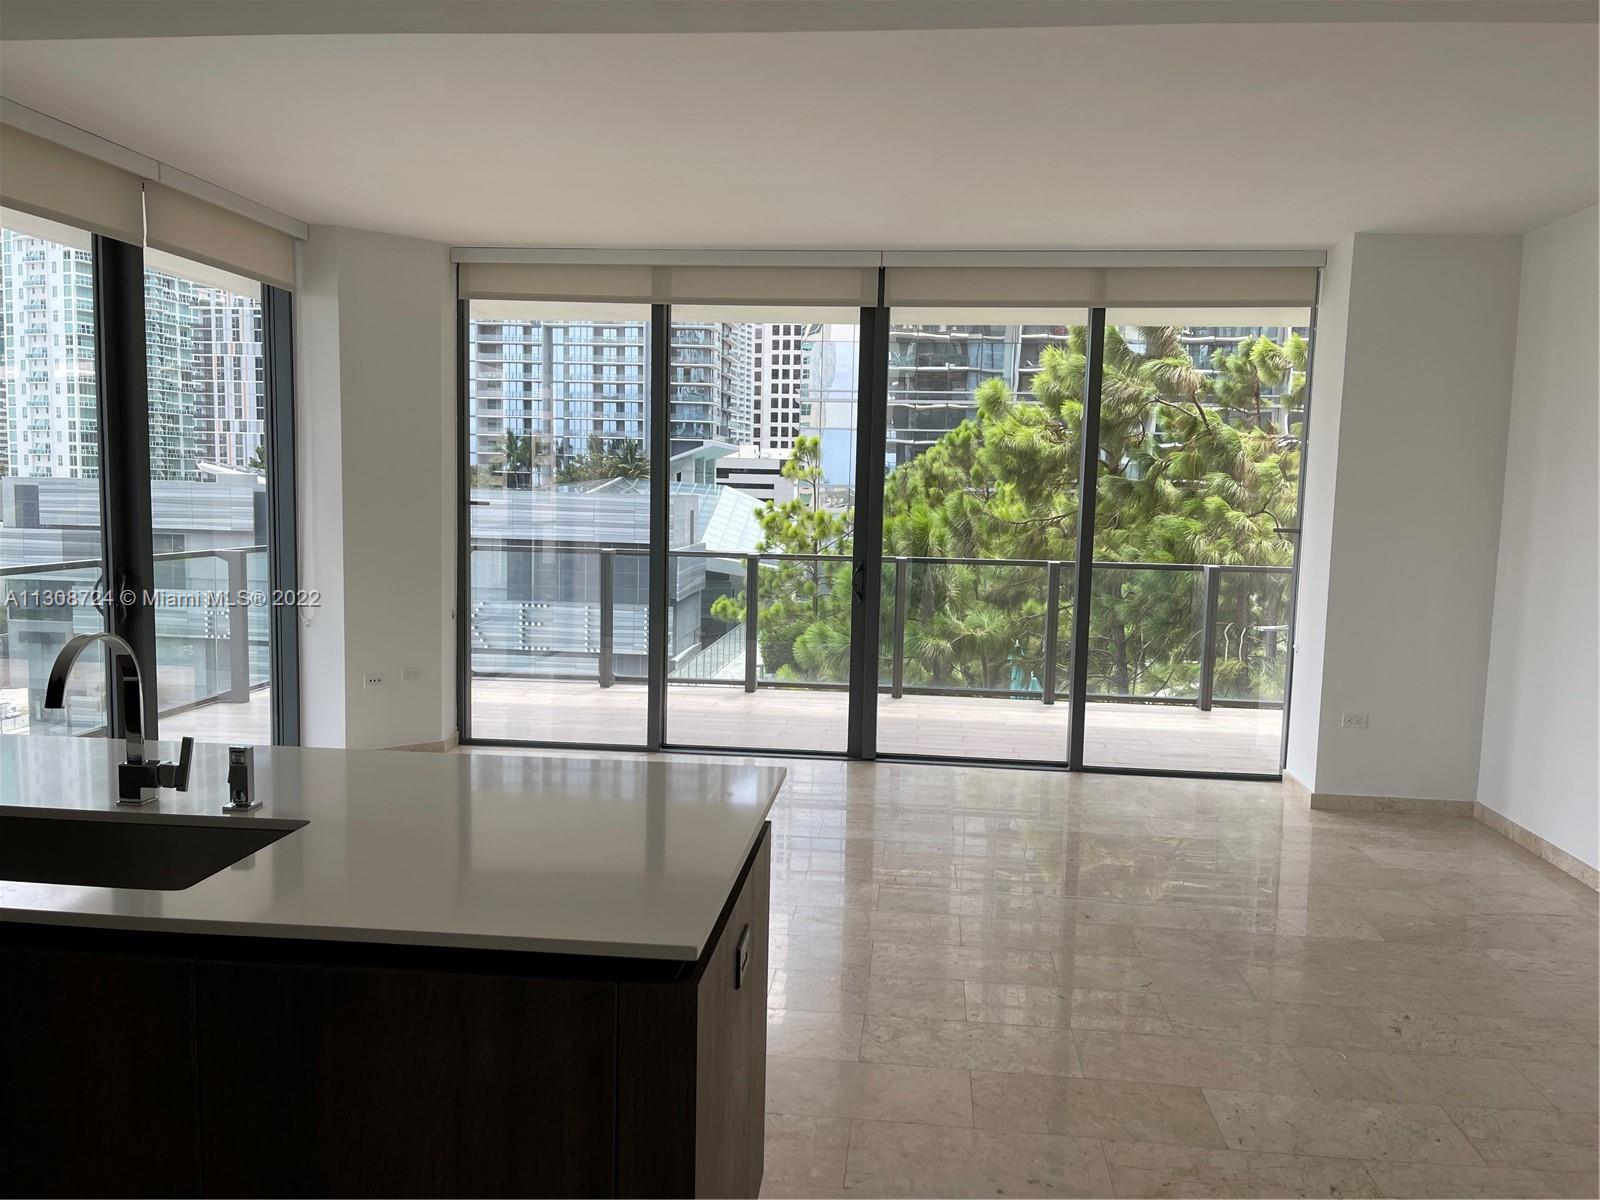 Amazing corner unit 2 bedrooms, 2.5 baths with elegant finishes giving it a modern and luxurious feeling. Skyline and river views. Wrap around terraces. An integrated living area perfectAmazing  c for entertaining and enjoying the city lifestyle. Premium appliances, wine cooler, Italian cabinetry. Floor-to-ceiling glass doors. The building is located on top of Brickell City Center features unparalleled amenities an expansive, half-acre amenity deck which includes tropical gardens, barbecue grills, outdoor fitness areas, fitness center, Spa with treatment rooms, aman, sauna, steam, beauty salon, coffee shop for residents, running track, party room, lounge, movie theater, pool, kids playground indoor and outdoors, concierge, valet parking. Direct access to shopping mall.